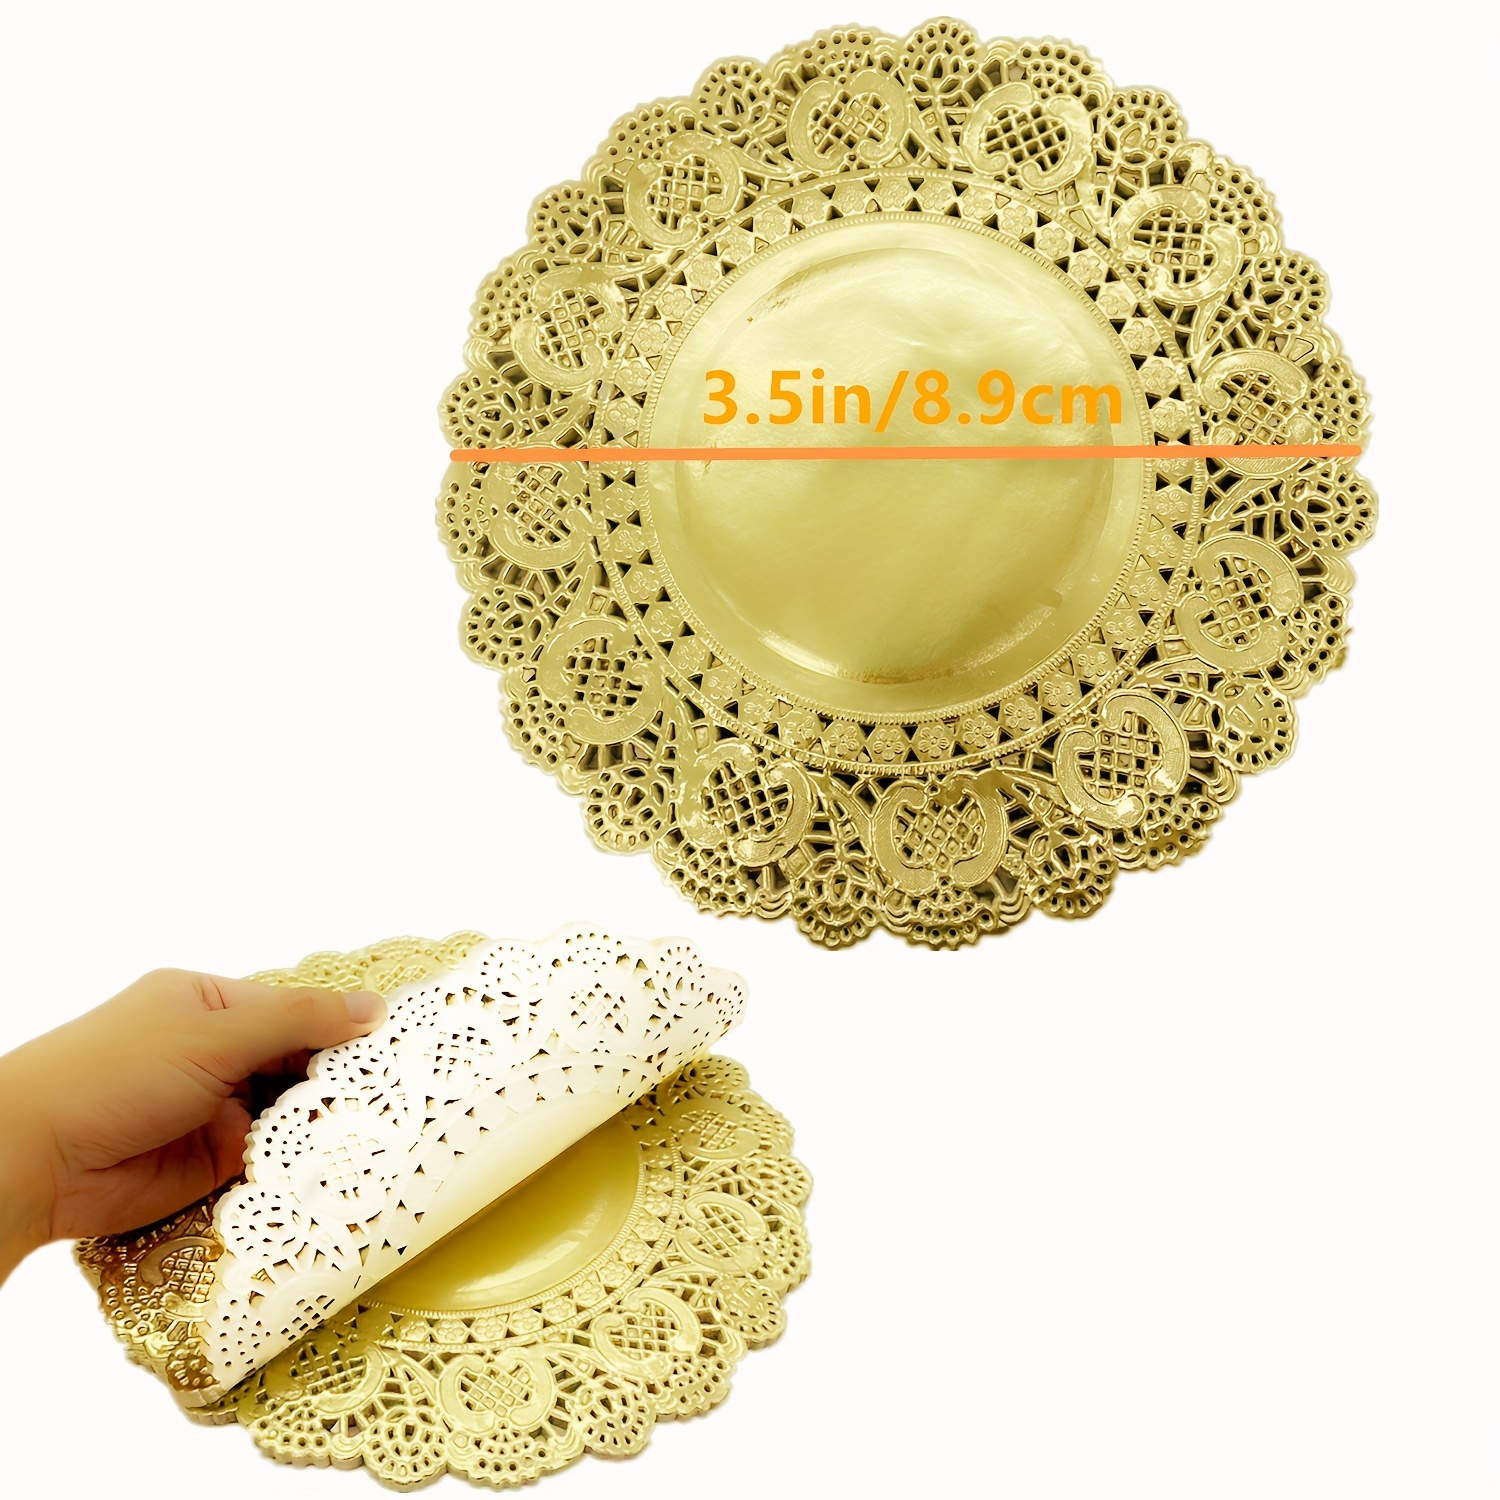 Round Paper Doilies, White, Gold, Silver